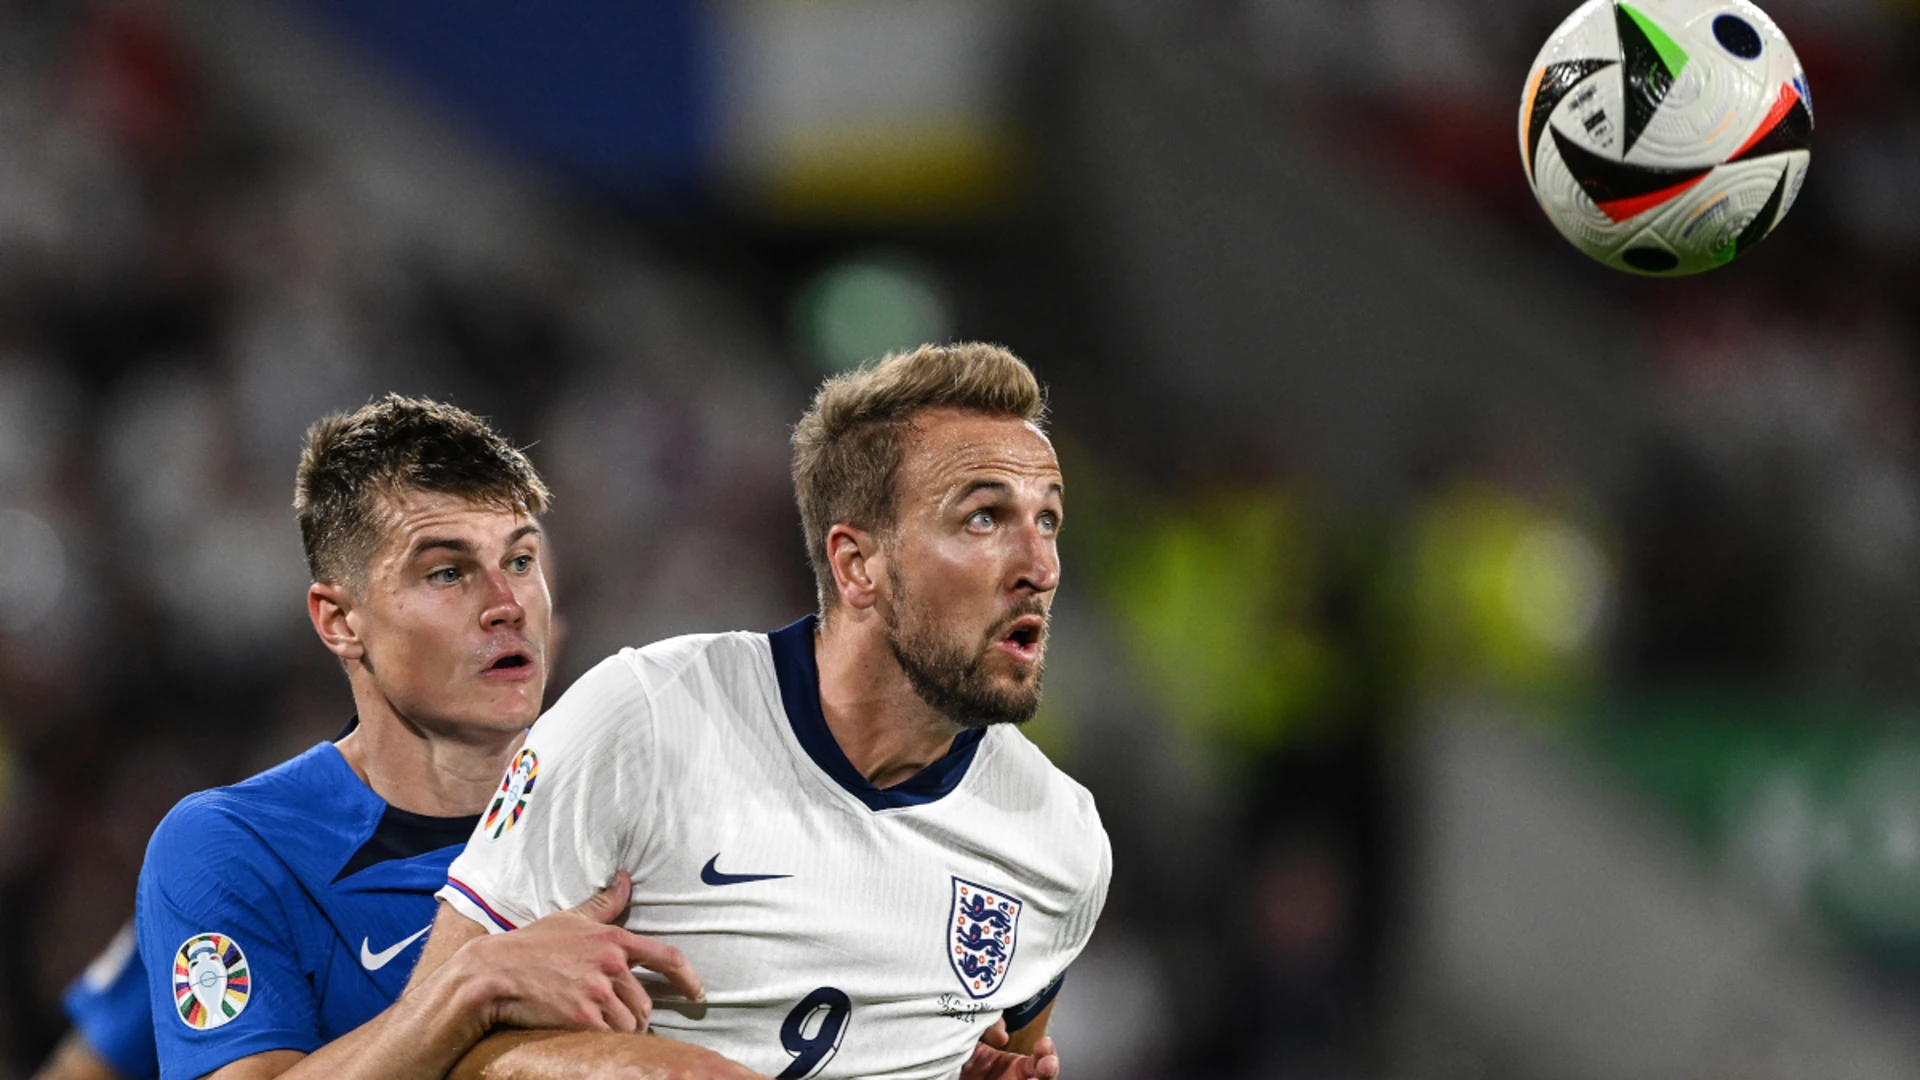 England achieved aim by winning Euro group says Kane after Slovenia draw